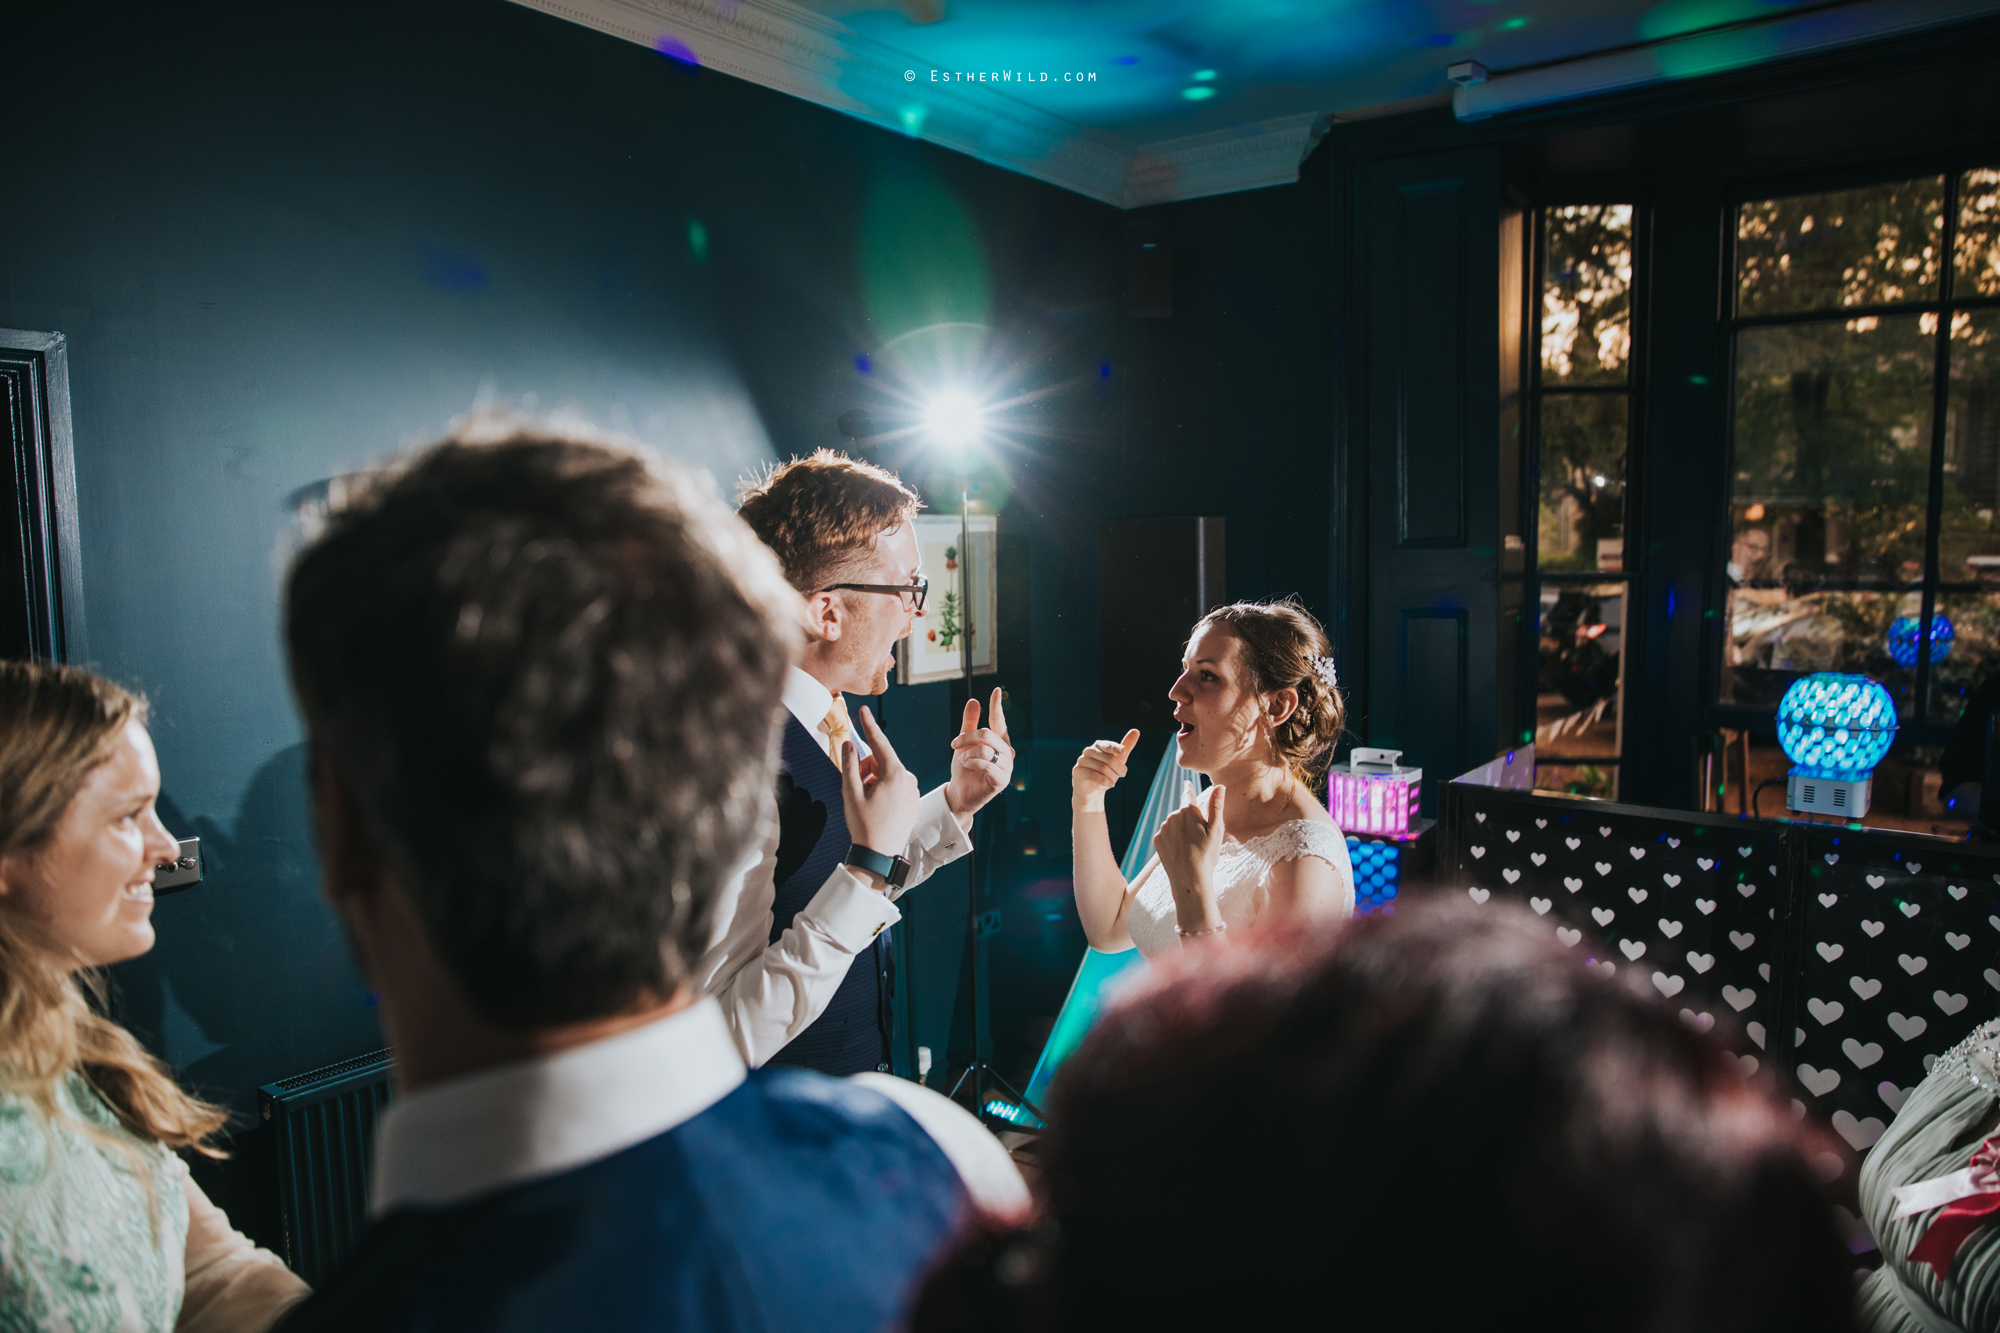  “Esther was more than a photographer on our wedding day, she was like another guest and a top ‘bride tribe’ member! Esther made time to make everyone feel comfortable and on the hottest, most stifling day EVER,  she turned up with a life-saving bag 